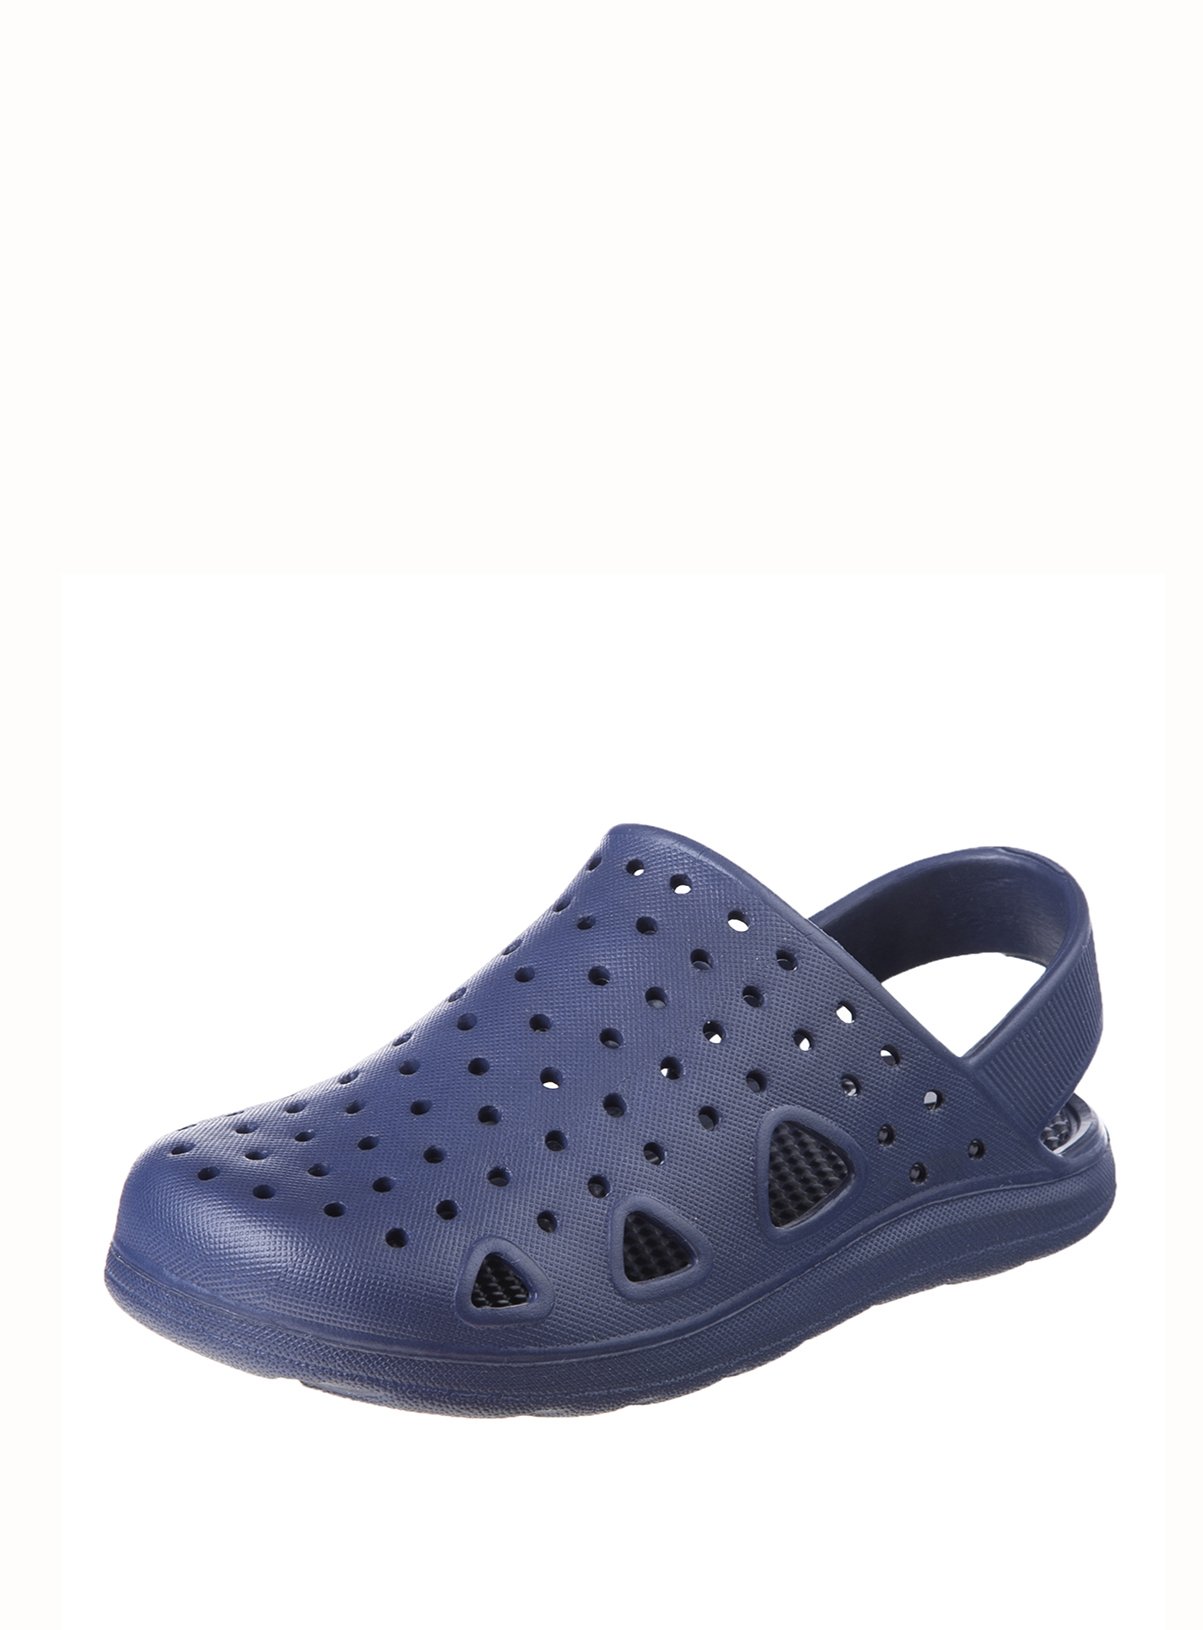 Sol Bounce Navy Clogs Review